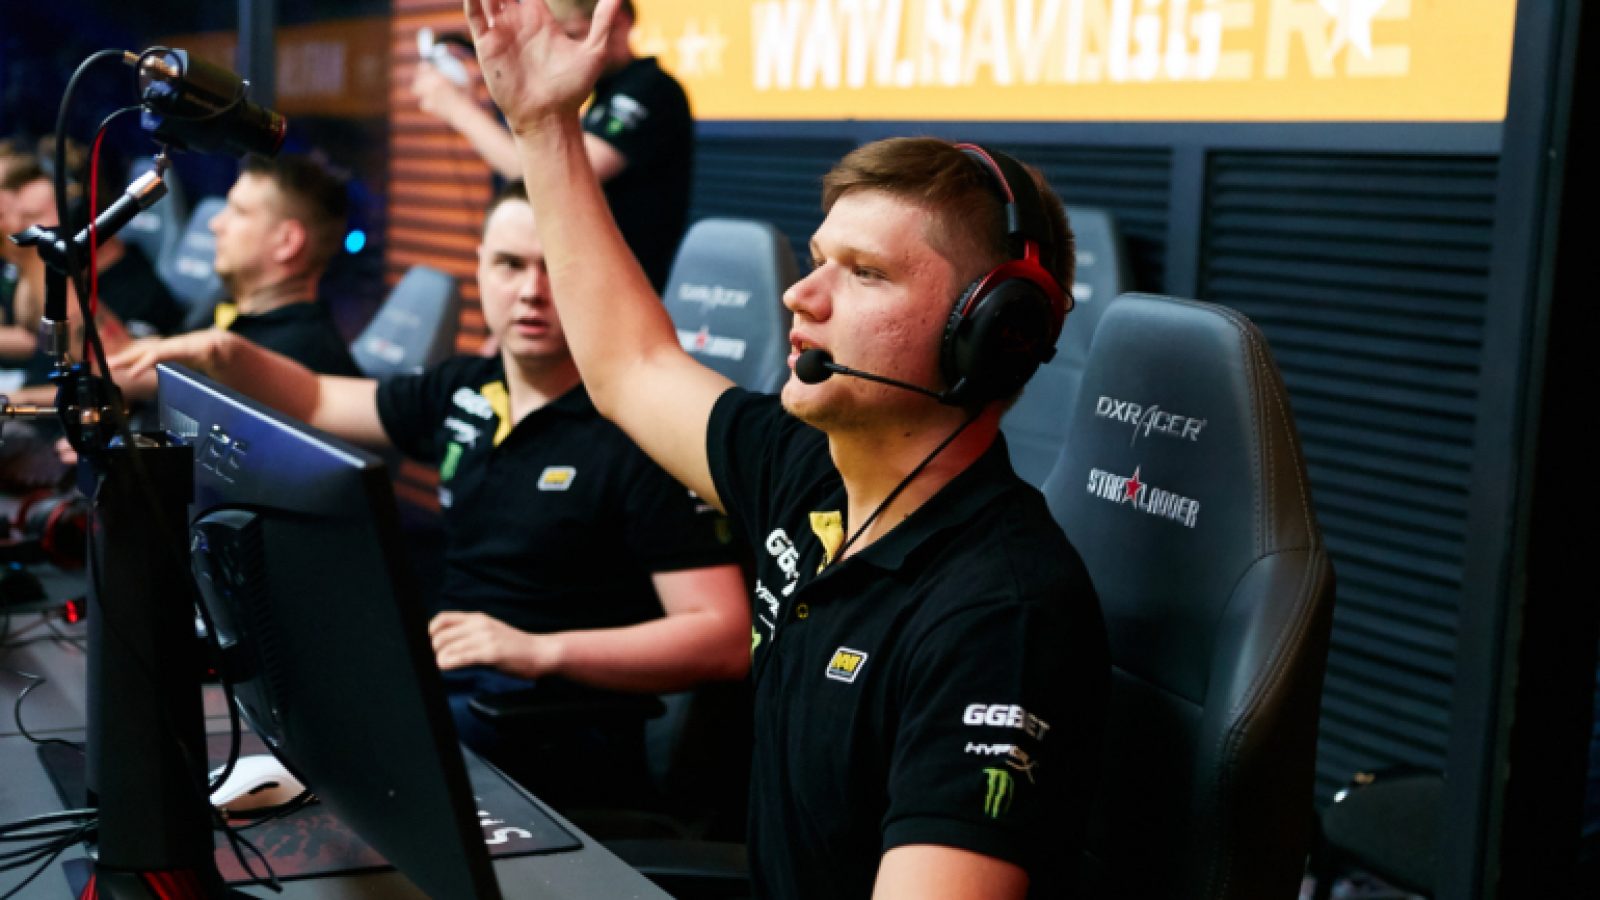 S1mple gets his first elo ranking and placement in world